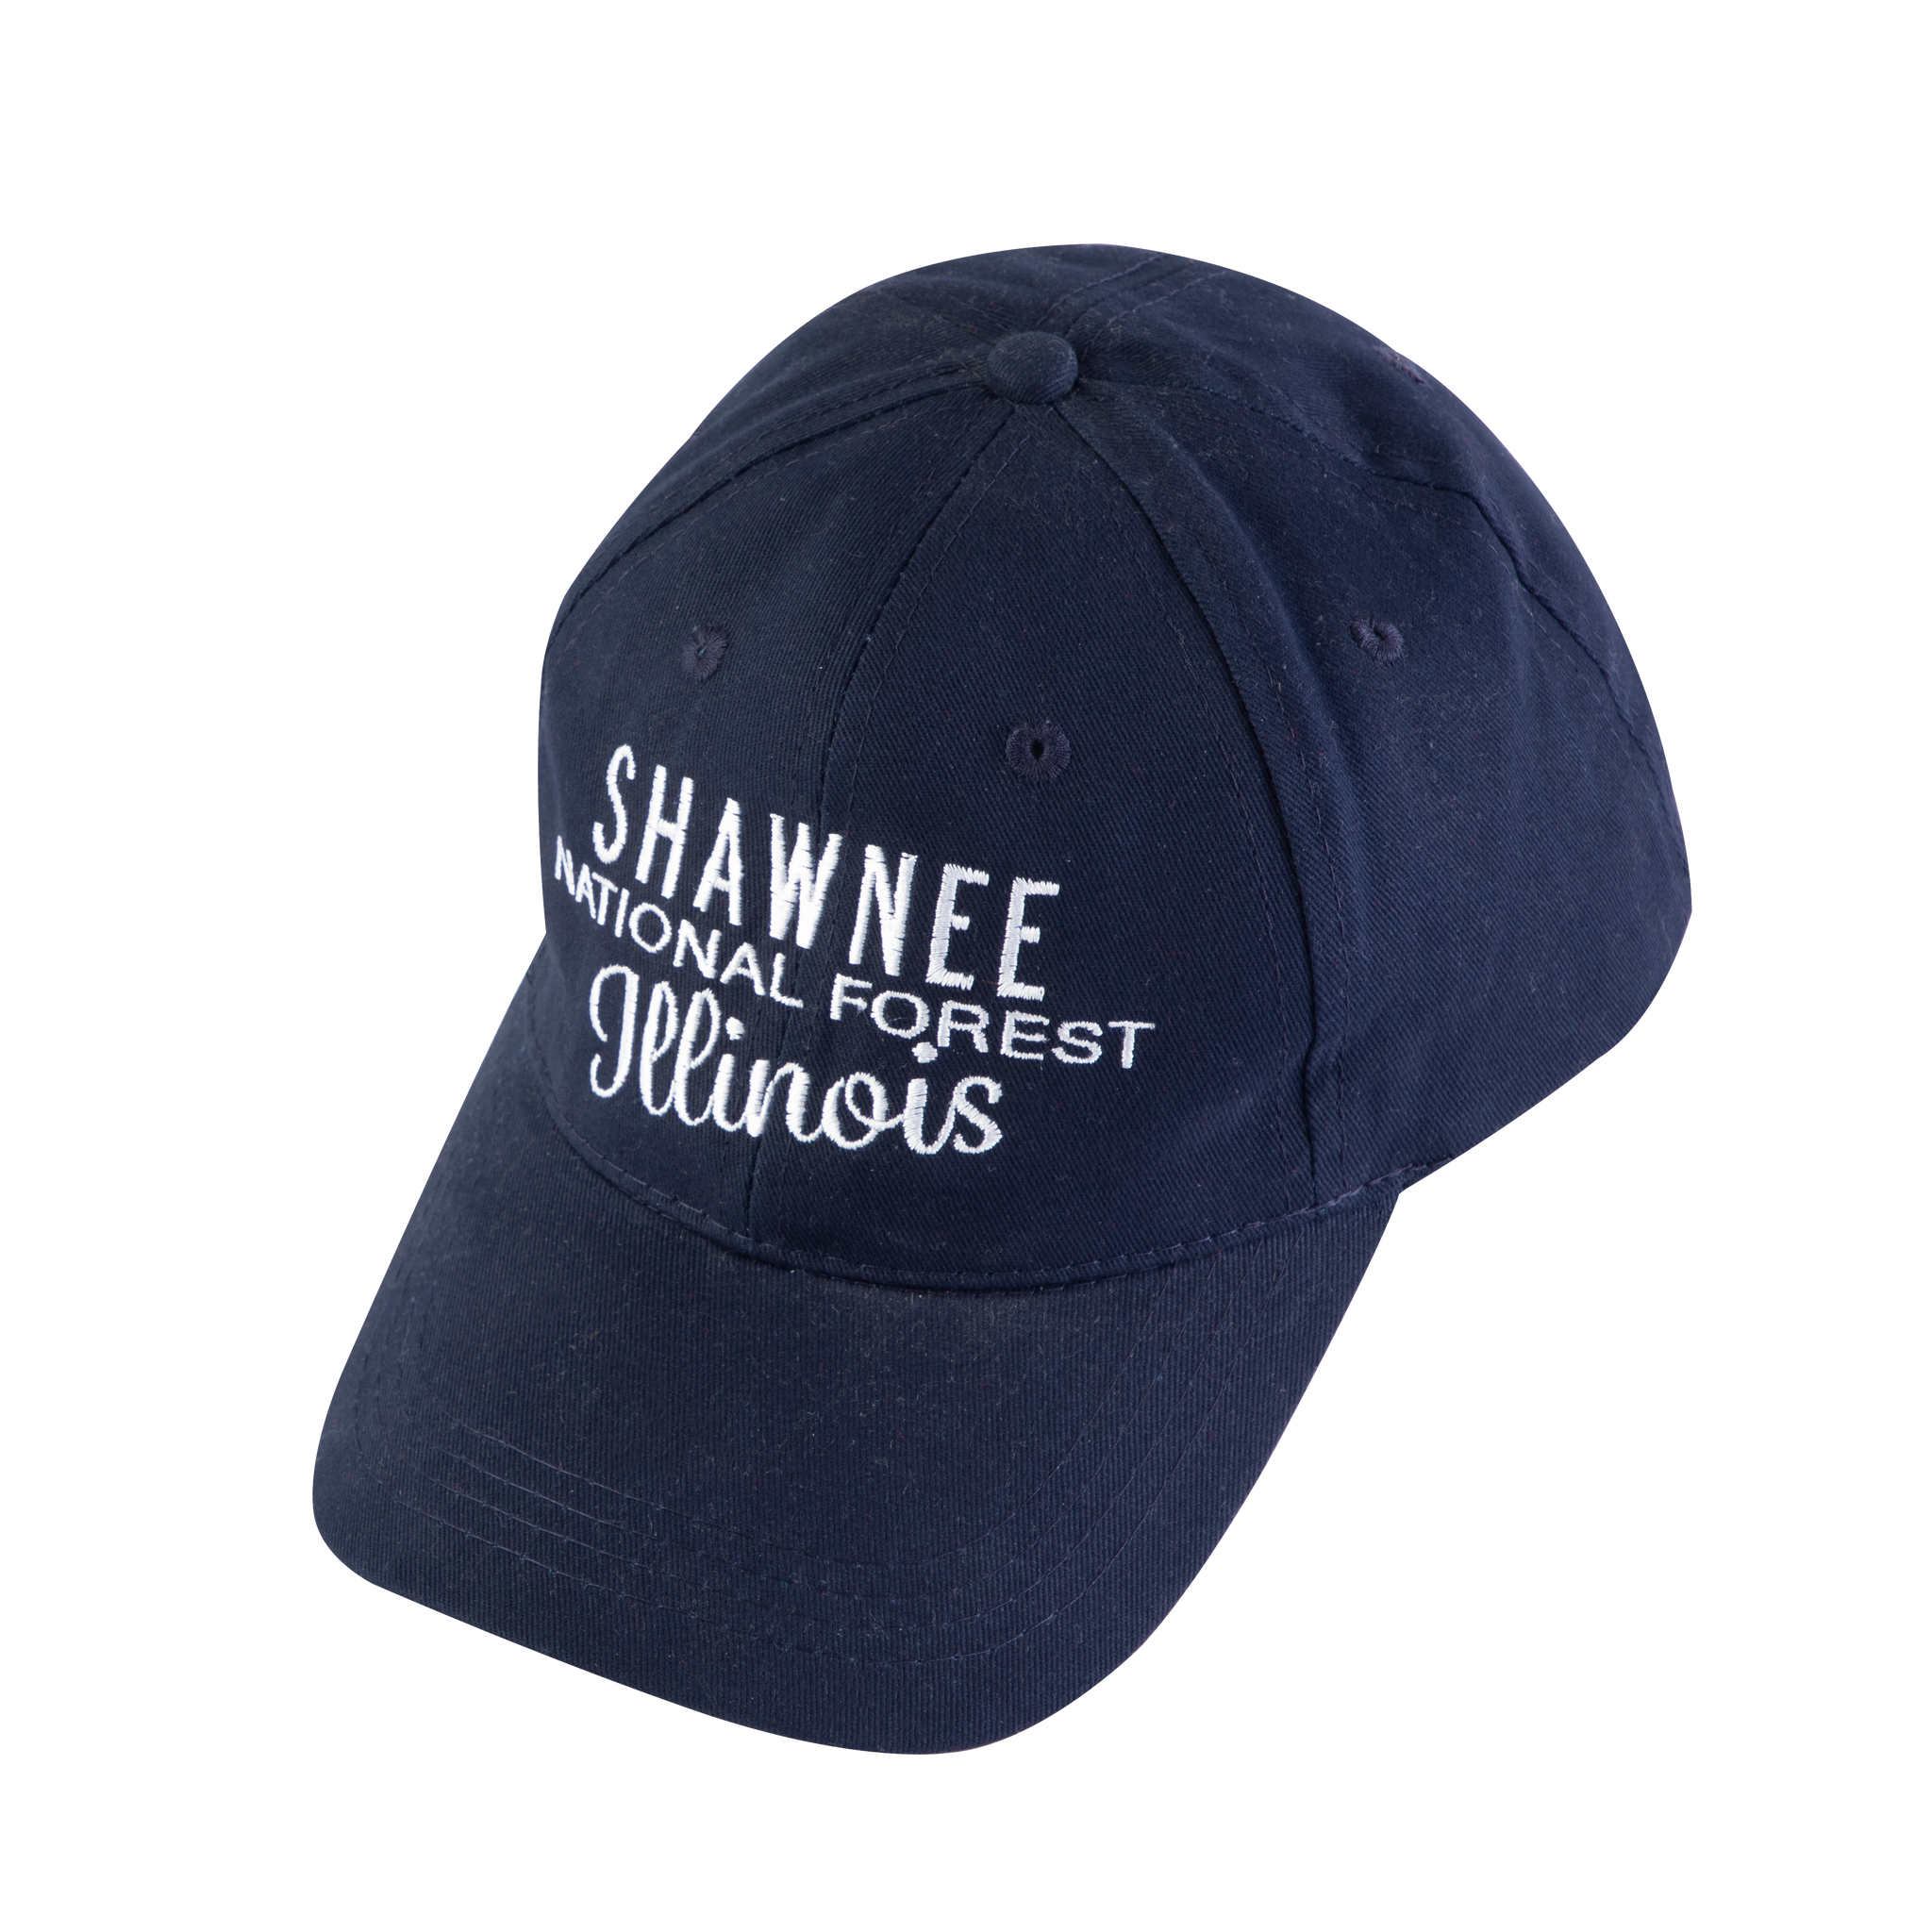 Ball Cap with Shawnee National Forest Illinois Embroidered